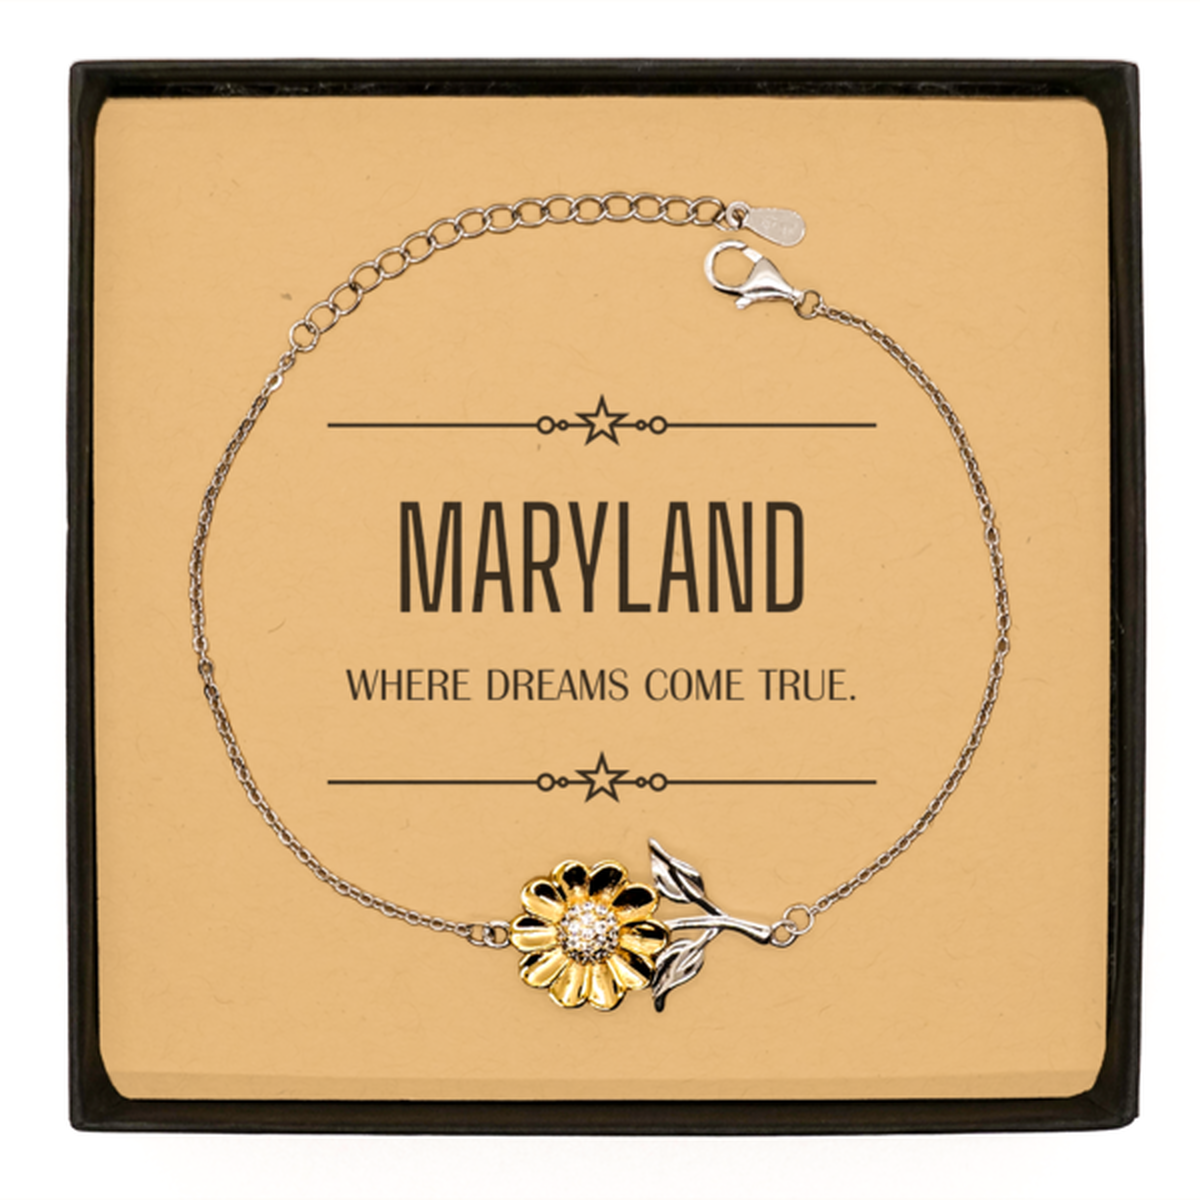 Love Maryland State Sunflower Bracelet, Maryland Where dreams come true, Birthday Inspirational Gifts For Maryland Men, Women, Friends